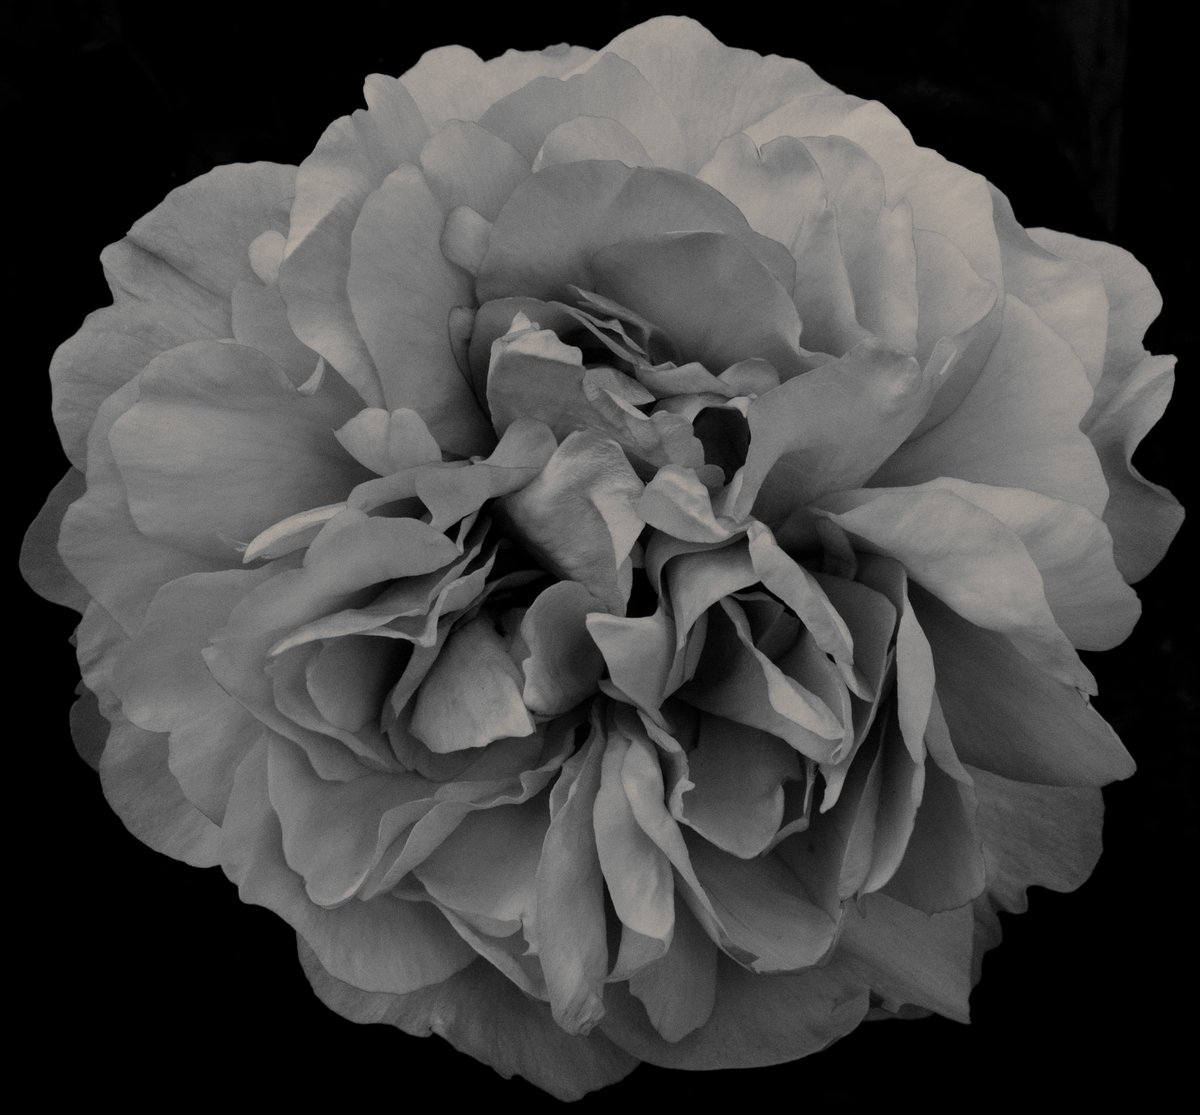 Rose flower in the garden. I like the intricacy of the petals. #blackandwhite #roses🌹 #flowers #petals
#madeinaffinity #madeinaffinityphoto #affinityphoto #affinityuniverse 
@CanonUKandIE @100asa_official #100asaofficial #100asa